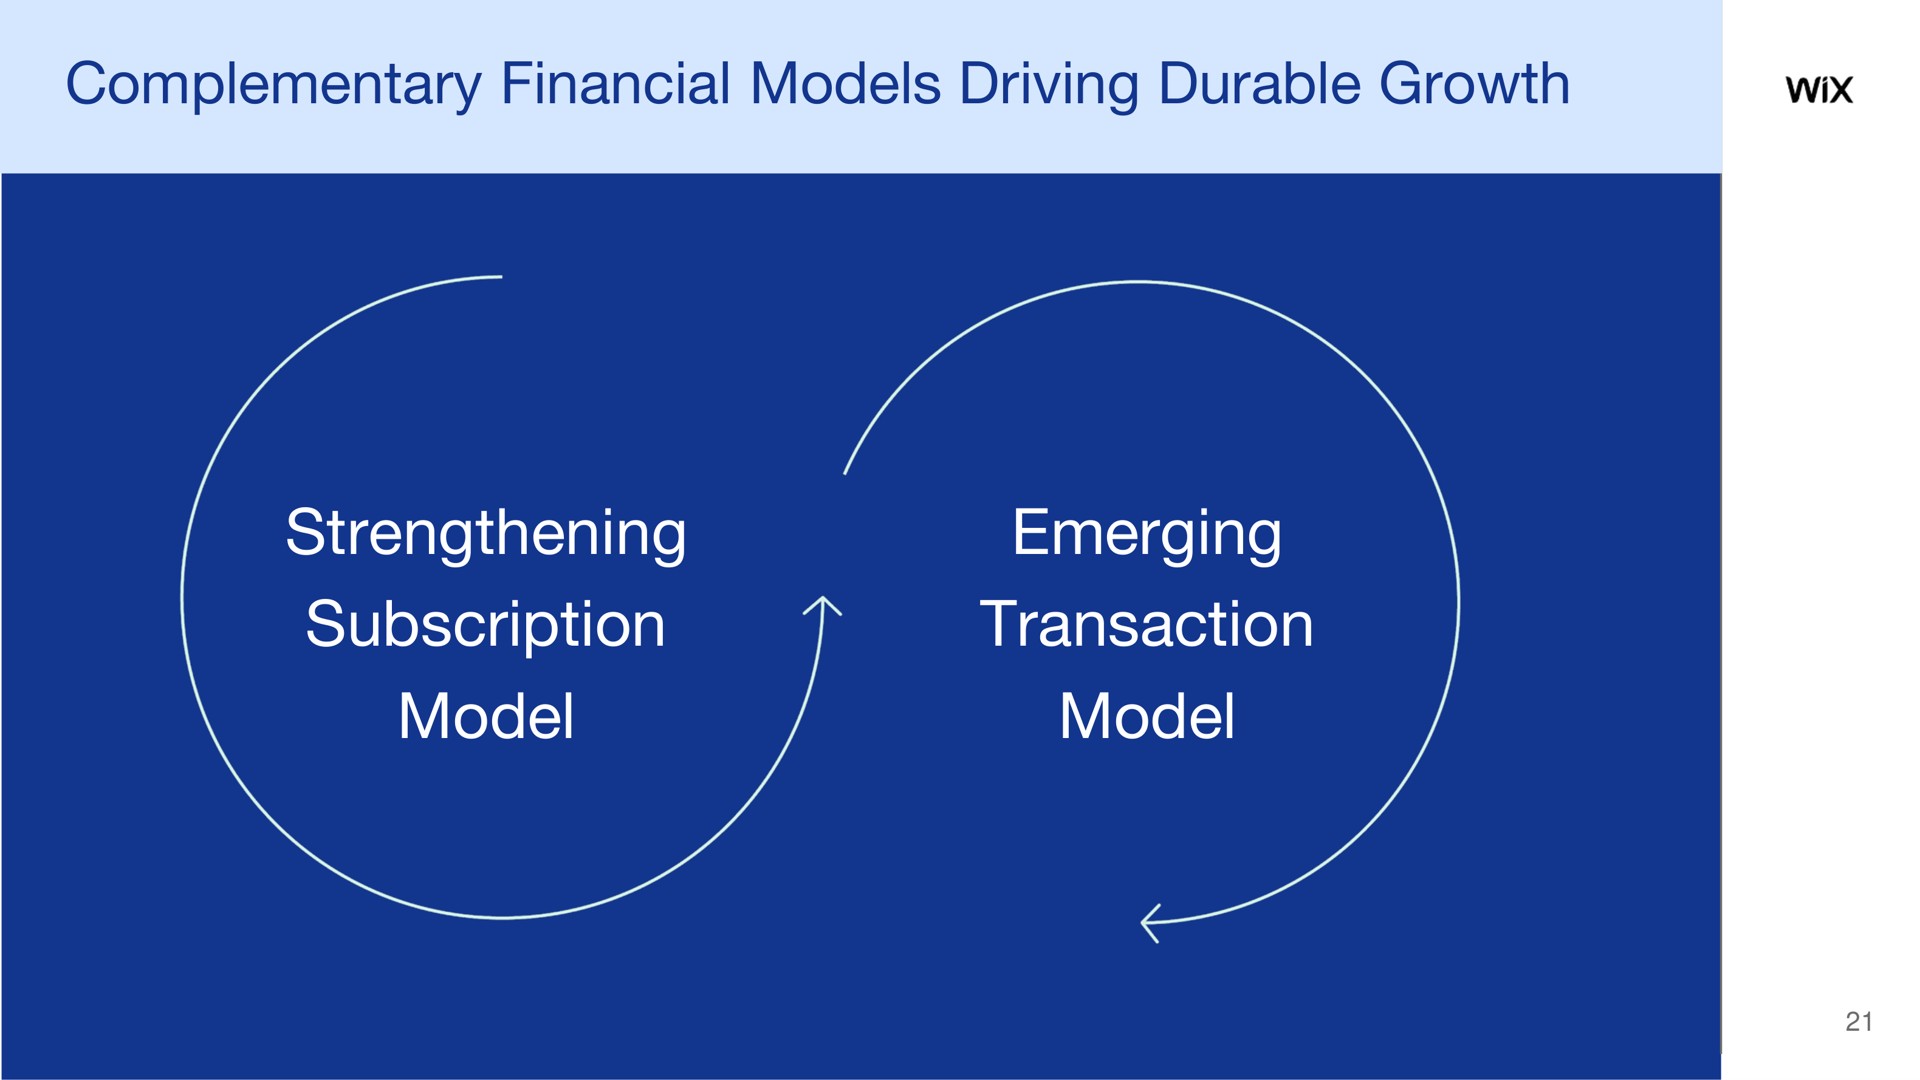 complementary financial models driving durable growth strengthening subscription model emerging transaction model | Wix